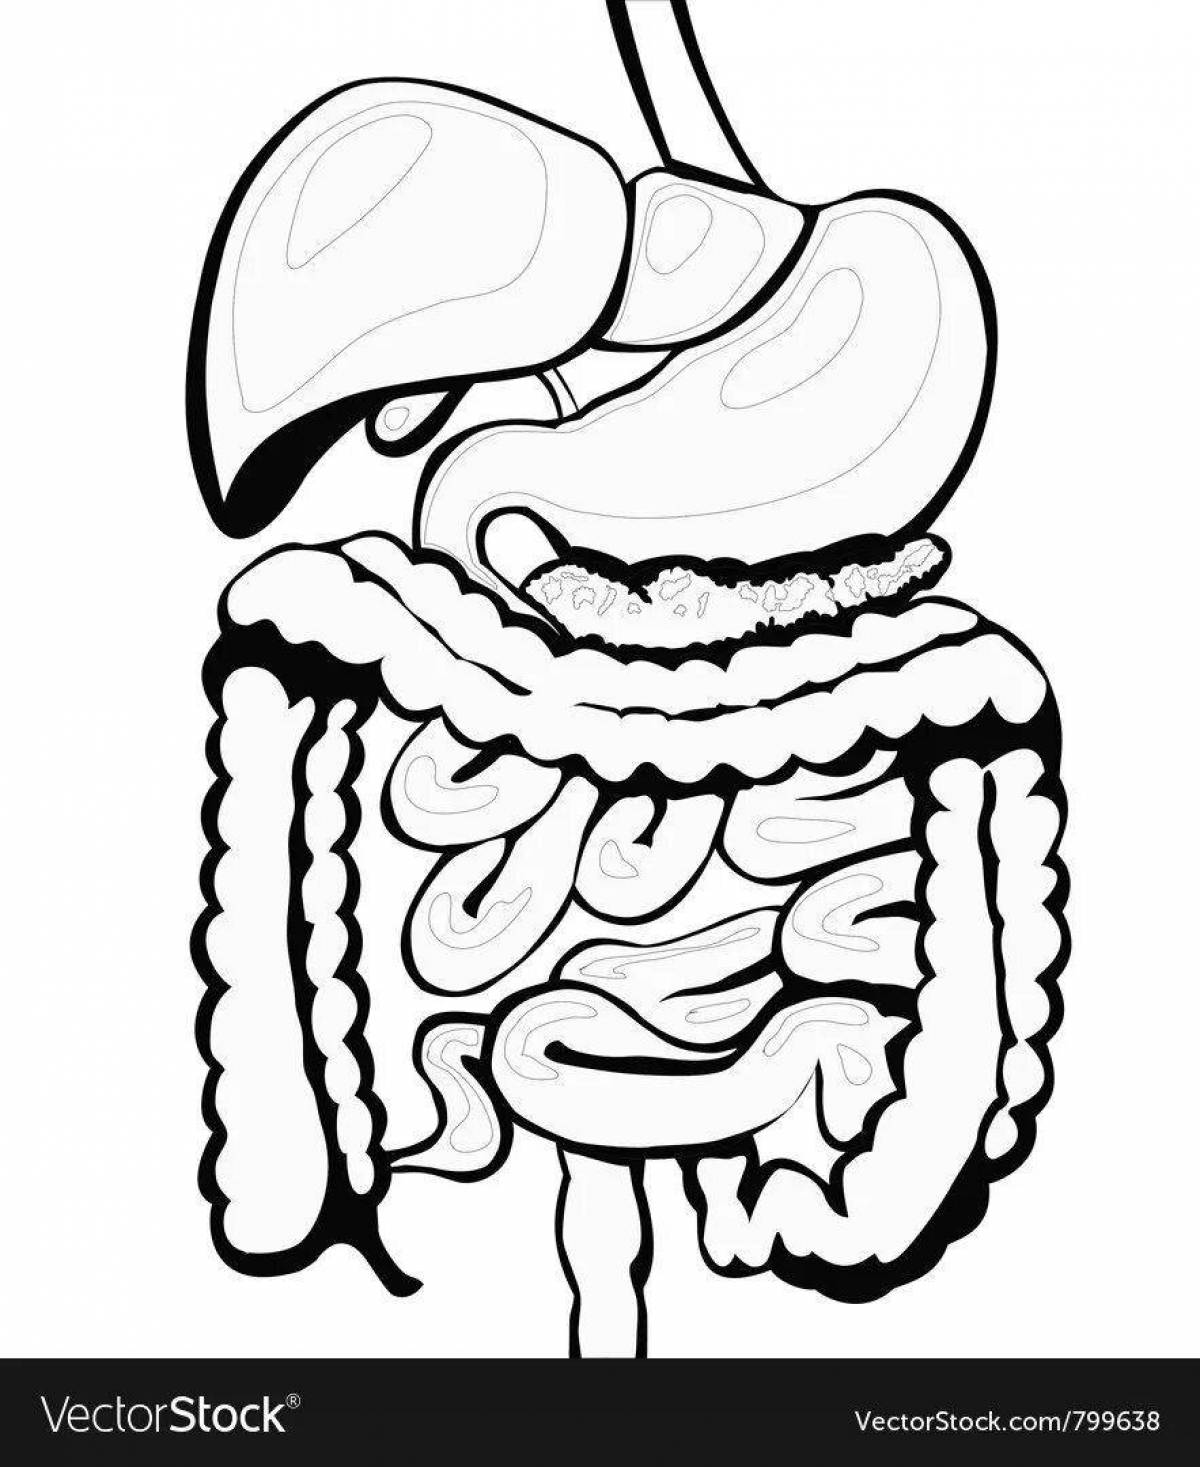 Complex coloring of the human digestive system